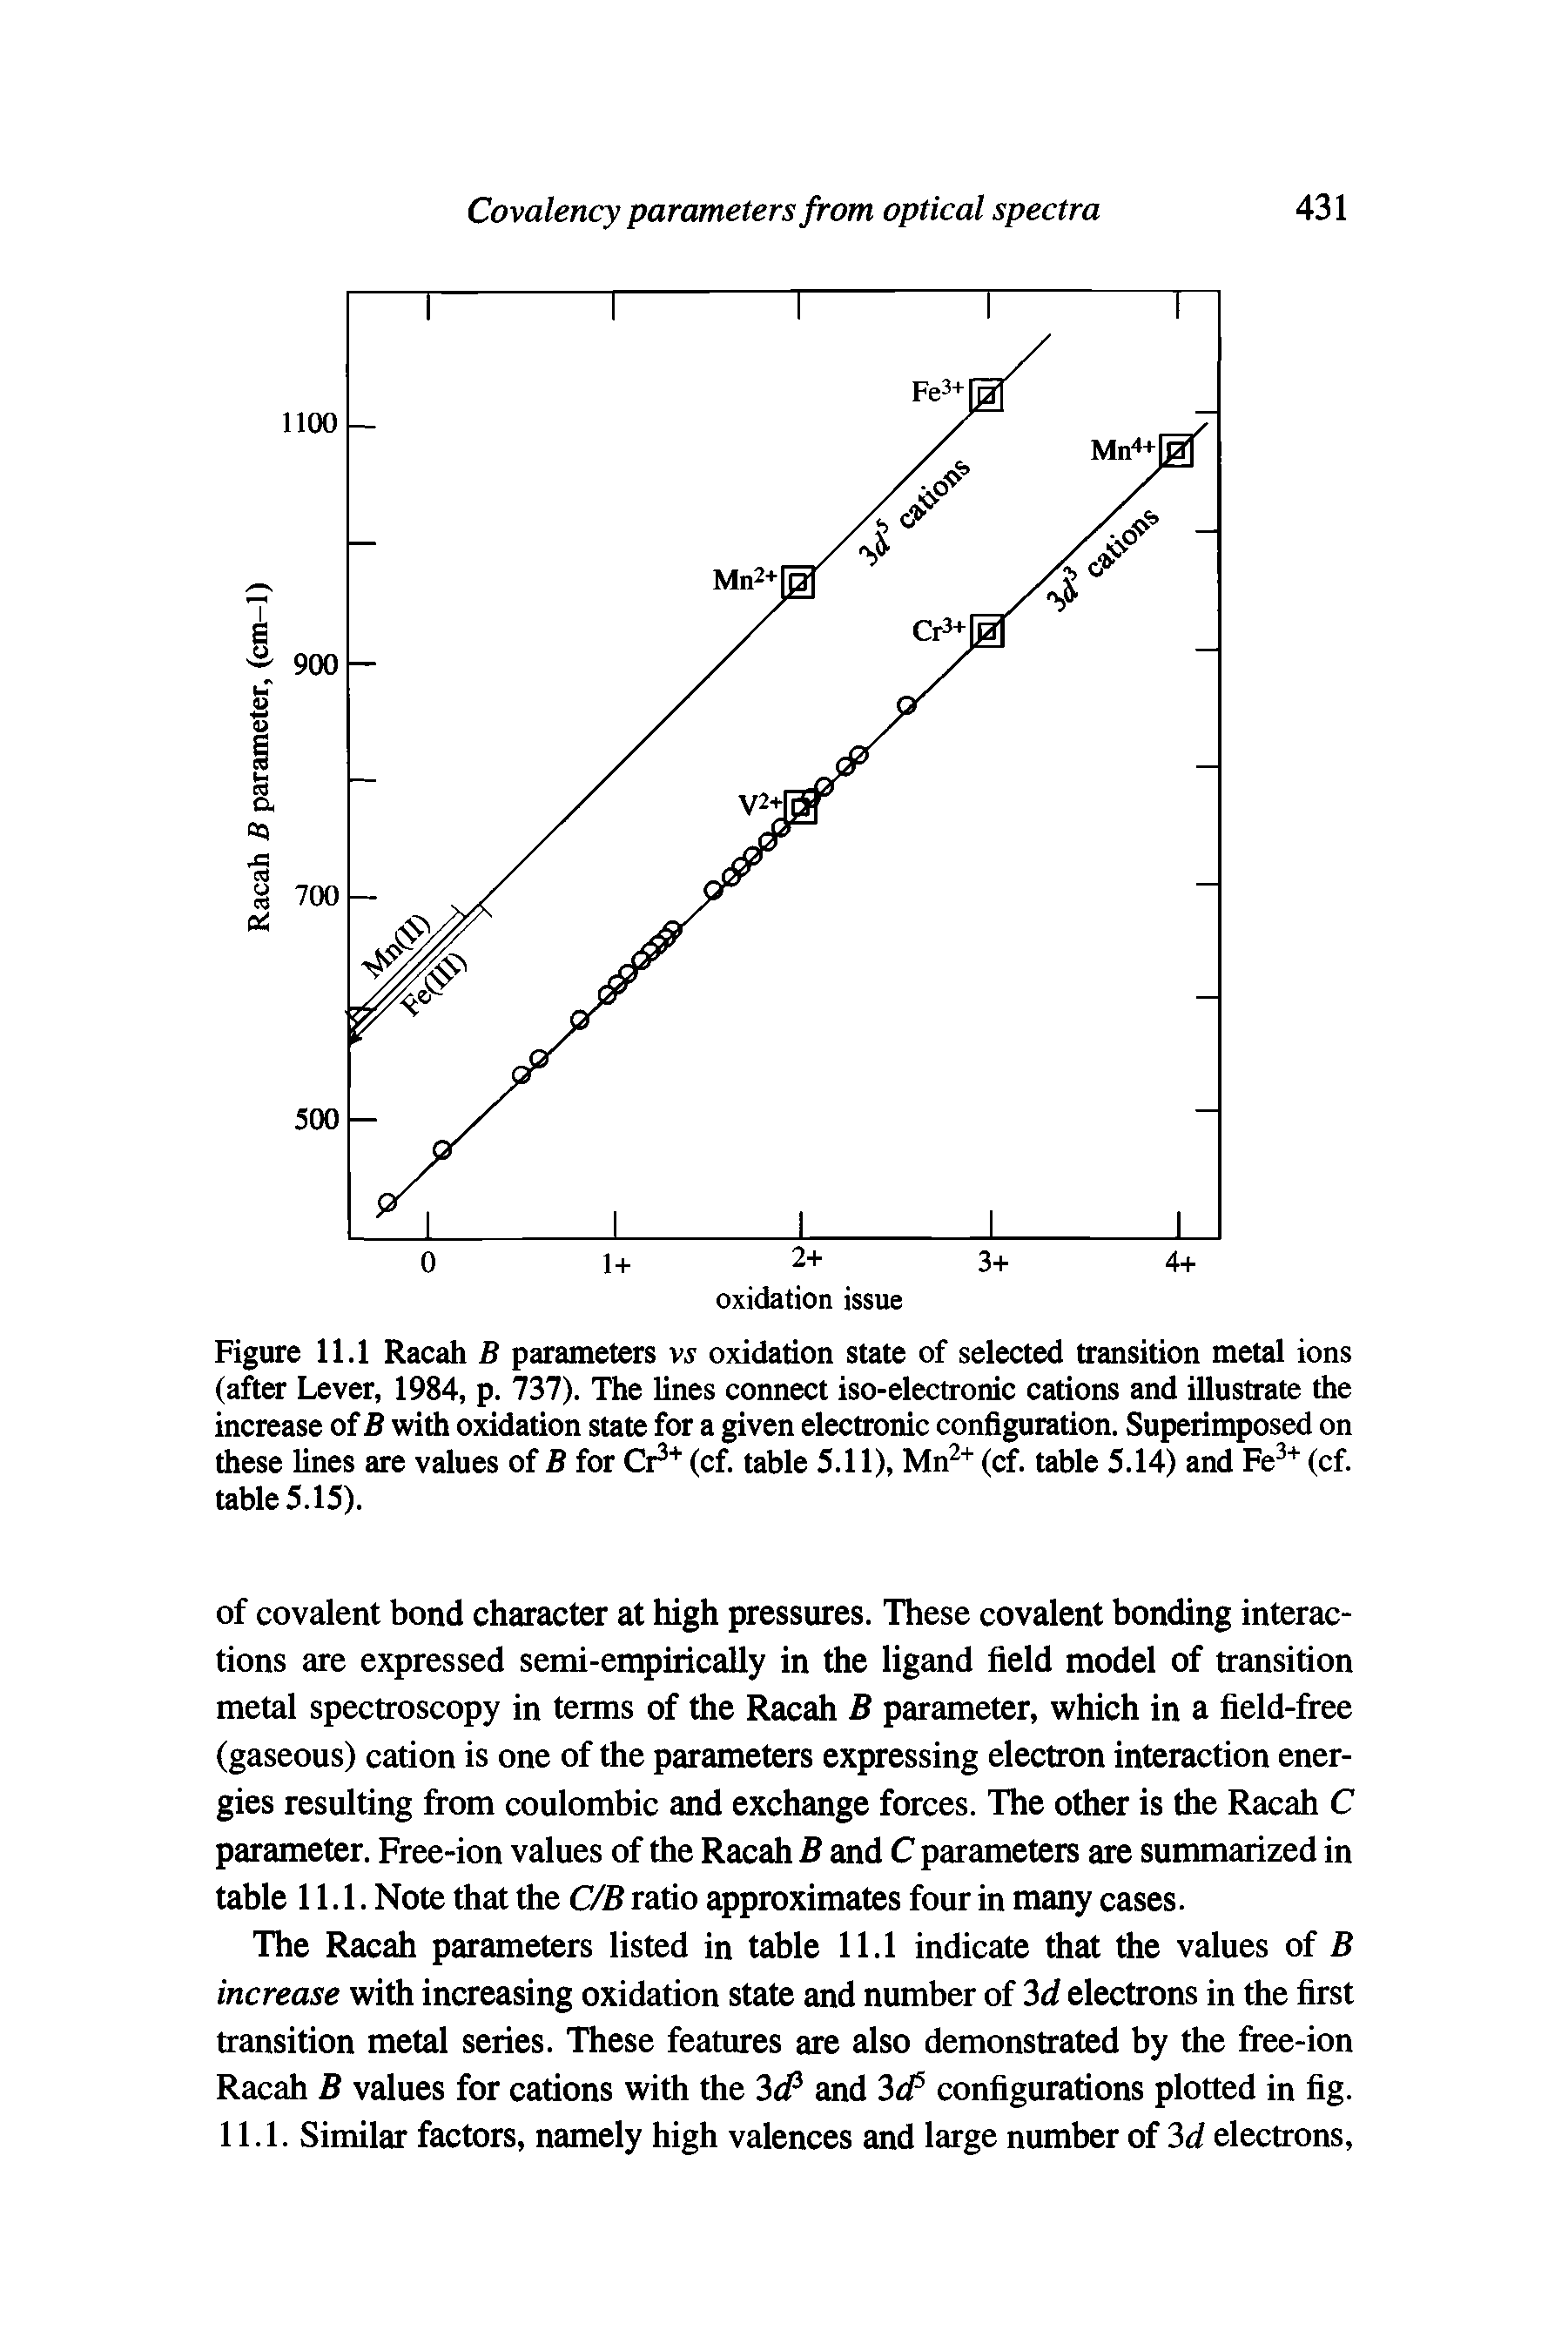 Figure 11.1 Racah B parameters vs oxidation state of selected transition metal ions (after Lever, 1984, p. 737). The lines connect iso-electronic cations and illustrate the increase of B with oxidation state for a given electronic configuration. Superimposed on these lines are values of B for Cr3+ (cf. table 5.11), Mn2+ (cf. table 5.14) and Fe3+ (cf. table 5.15).